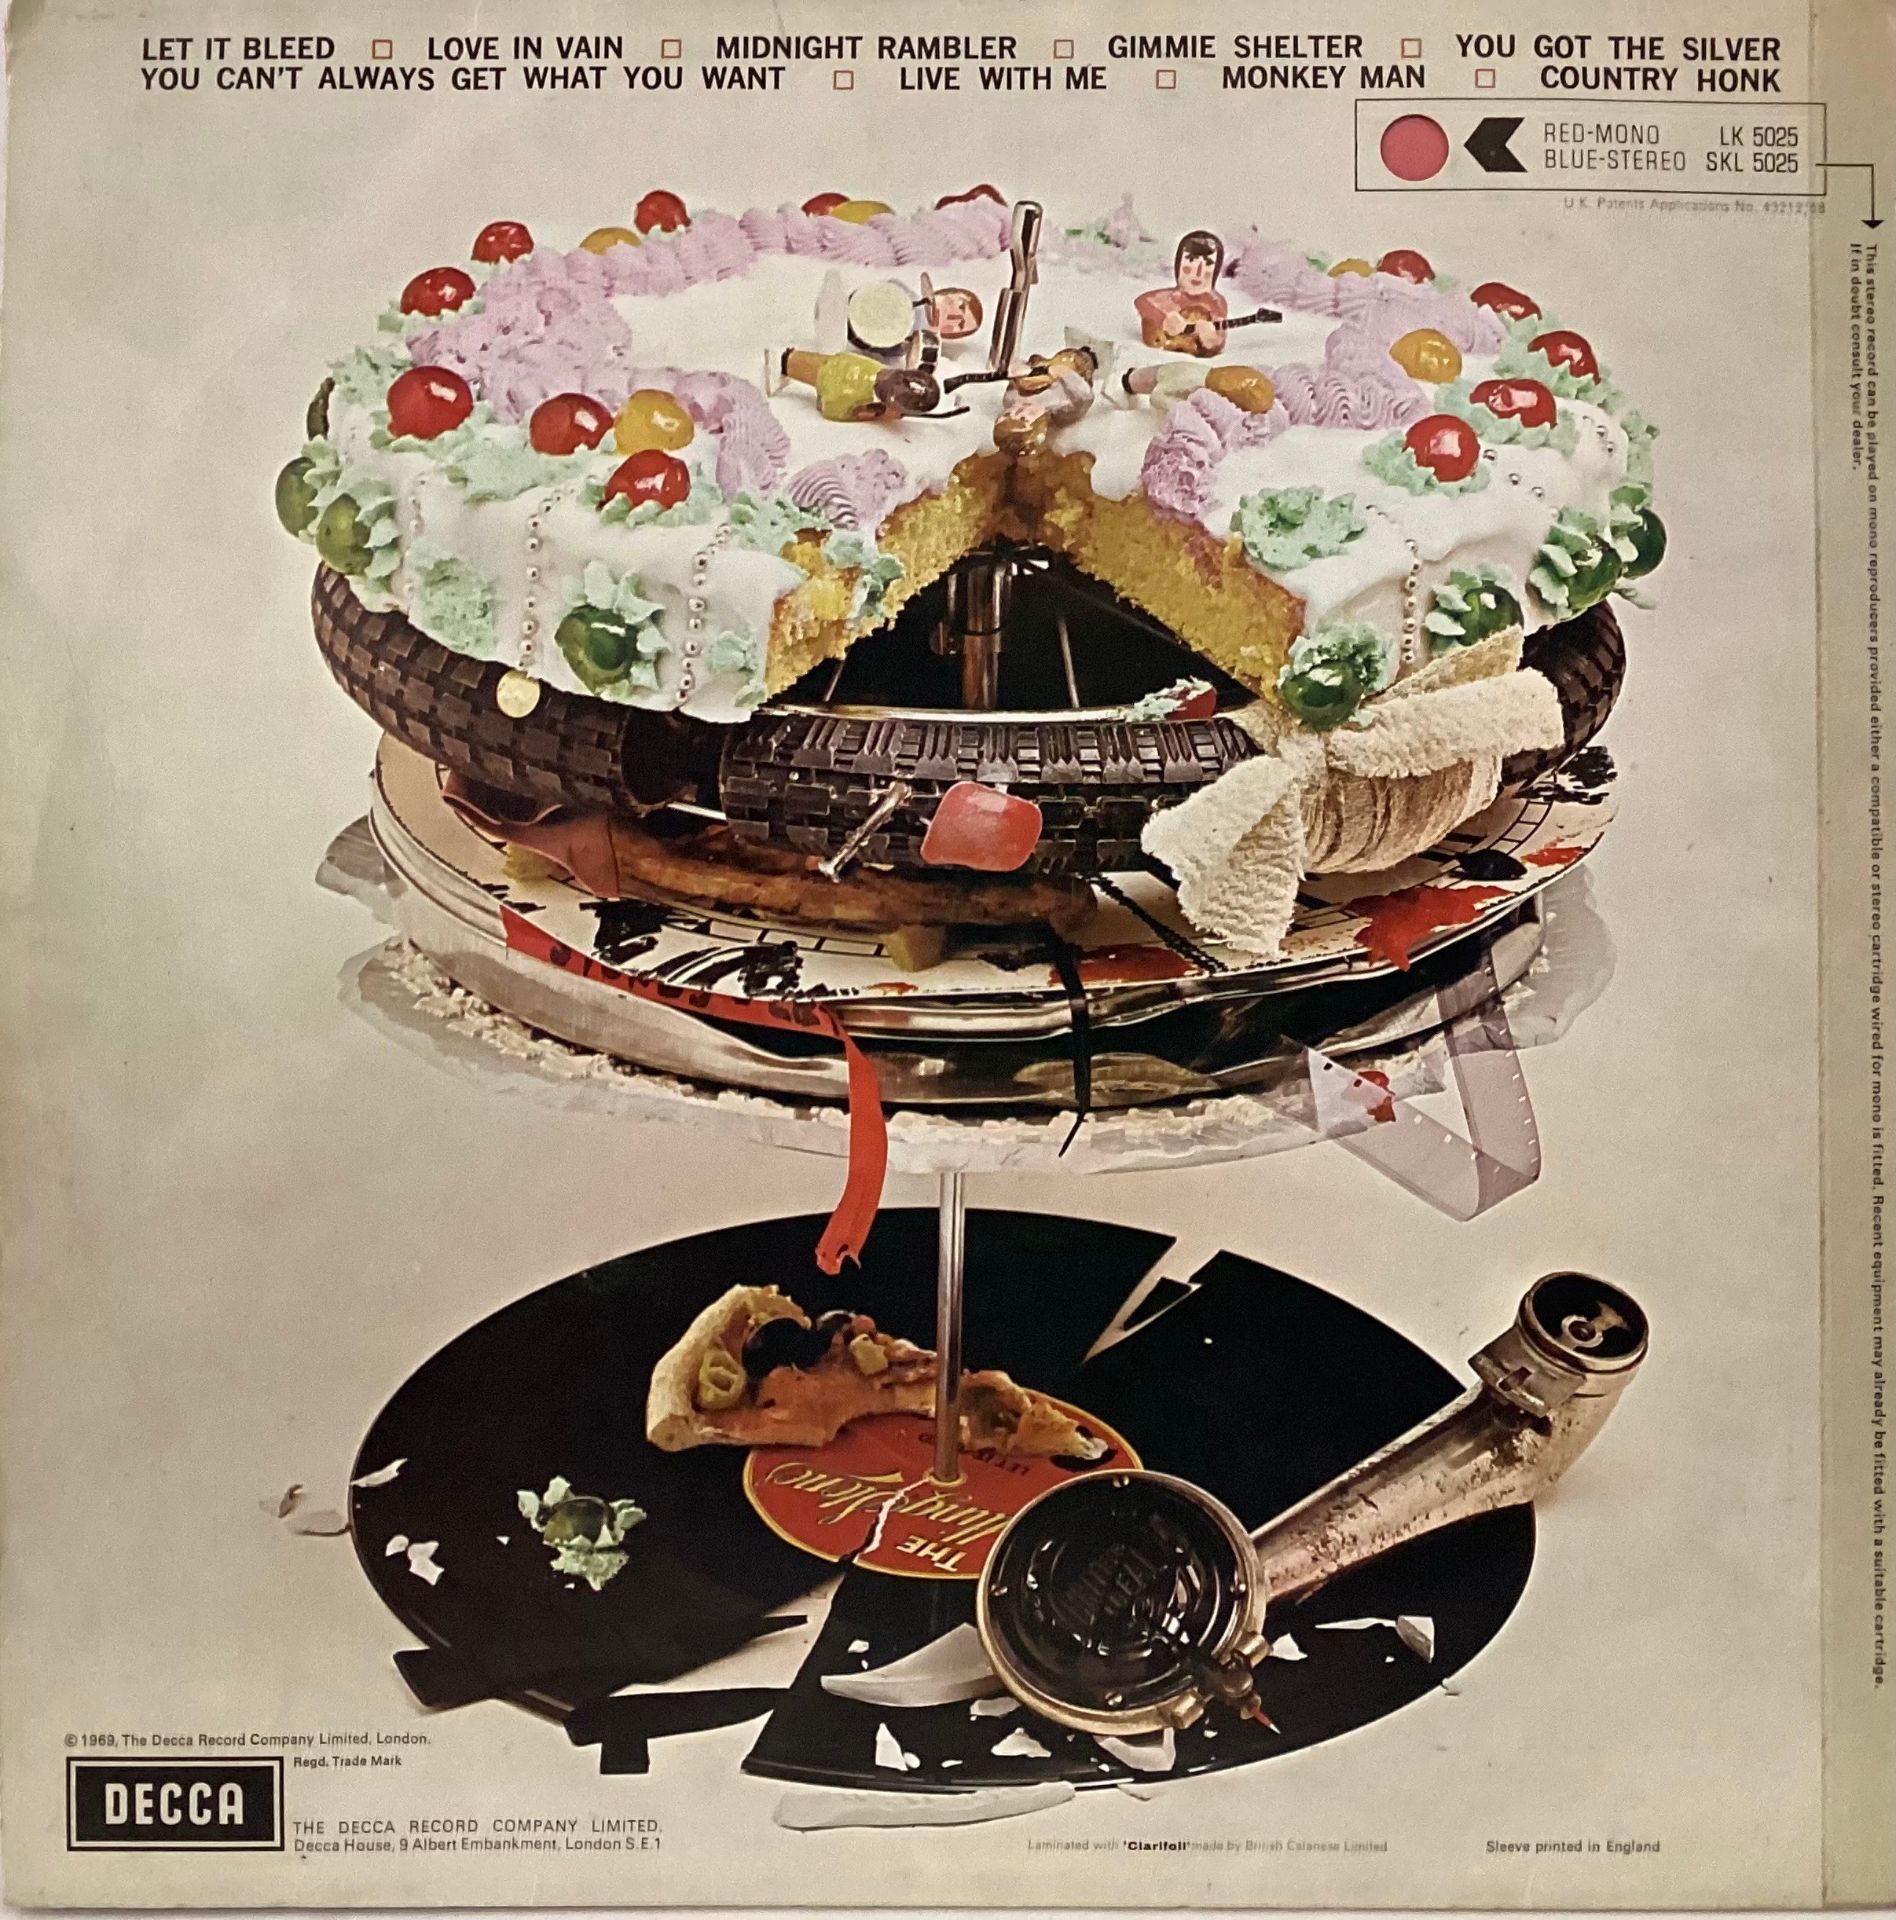 ROLLING STONES ‘LET IT BLEED’ UNBOXED DECCA LP. Great album found here with unboxed Decca label logo - Image 2 of 5